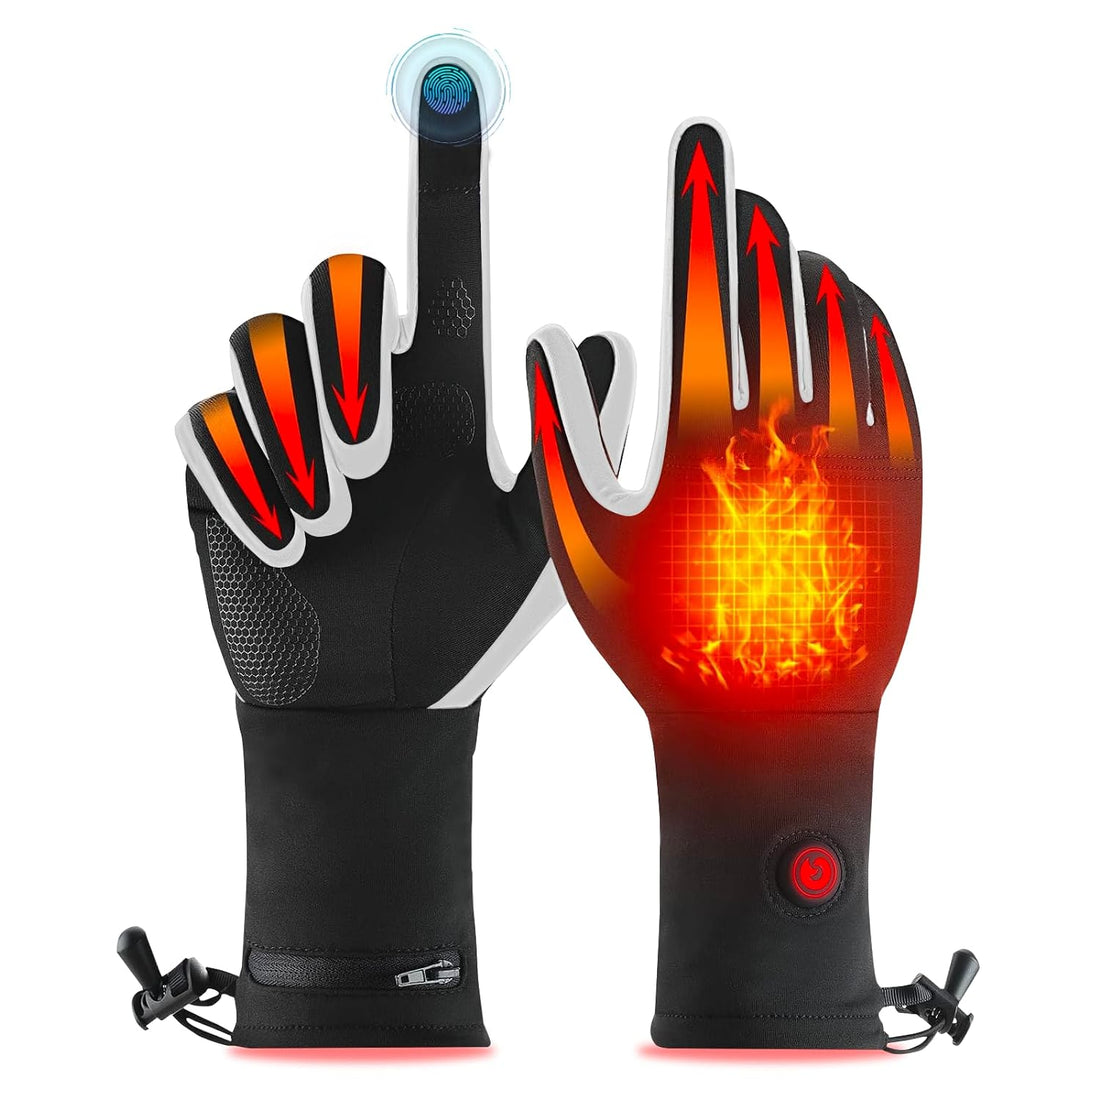 Heated Glove Liners, Heated Arthritis Gloves Raynauds Gloves, Winter Electric Heated Gloves for Men Women